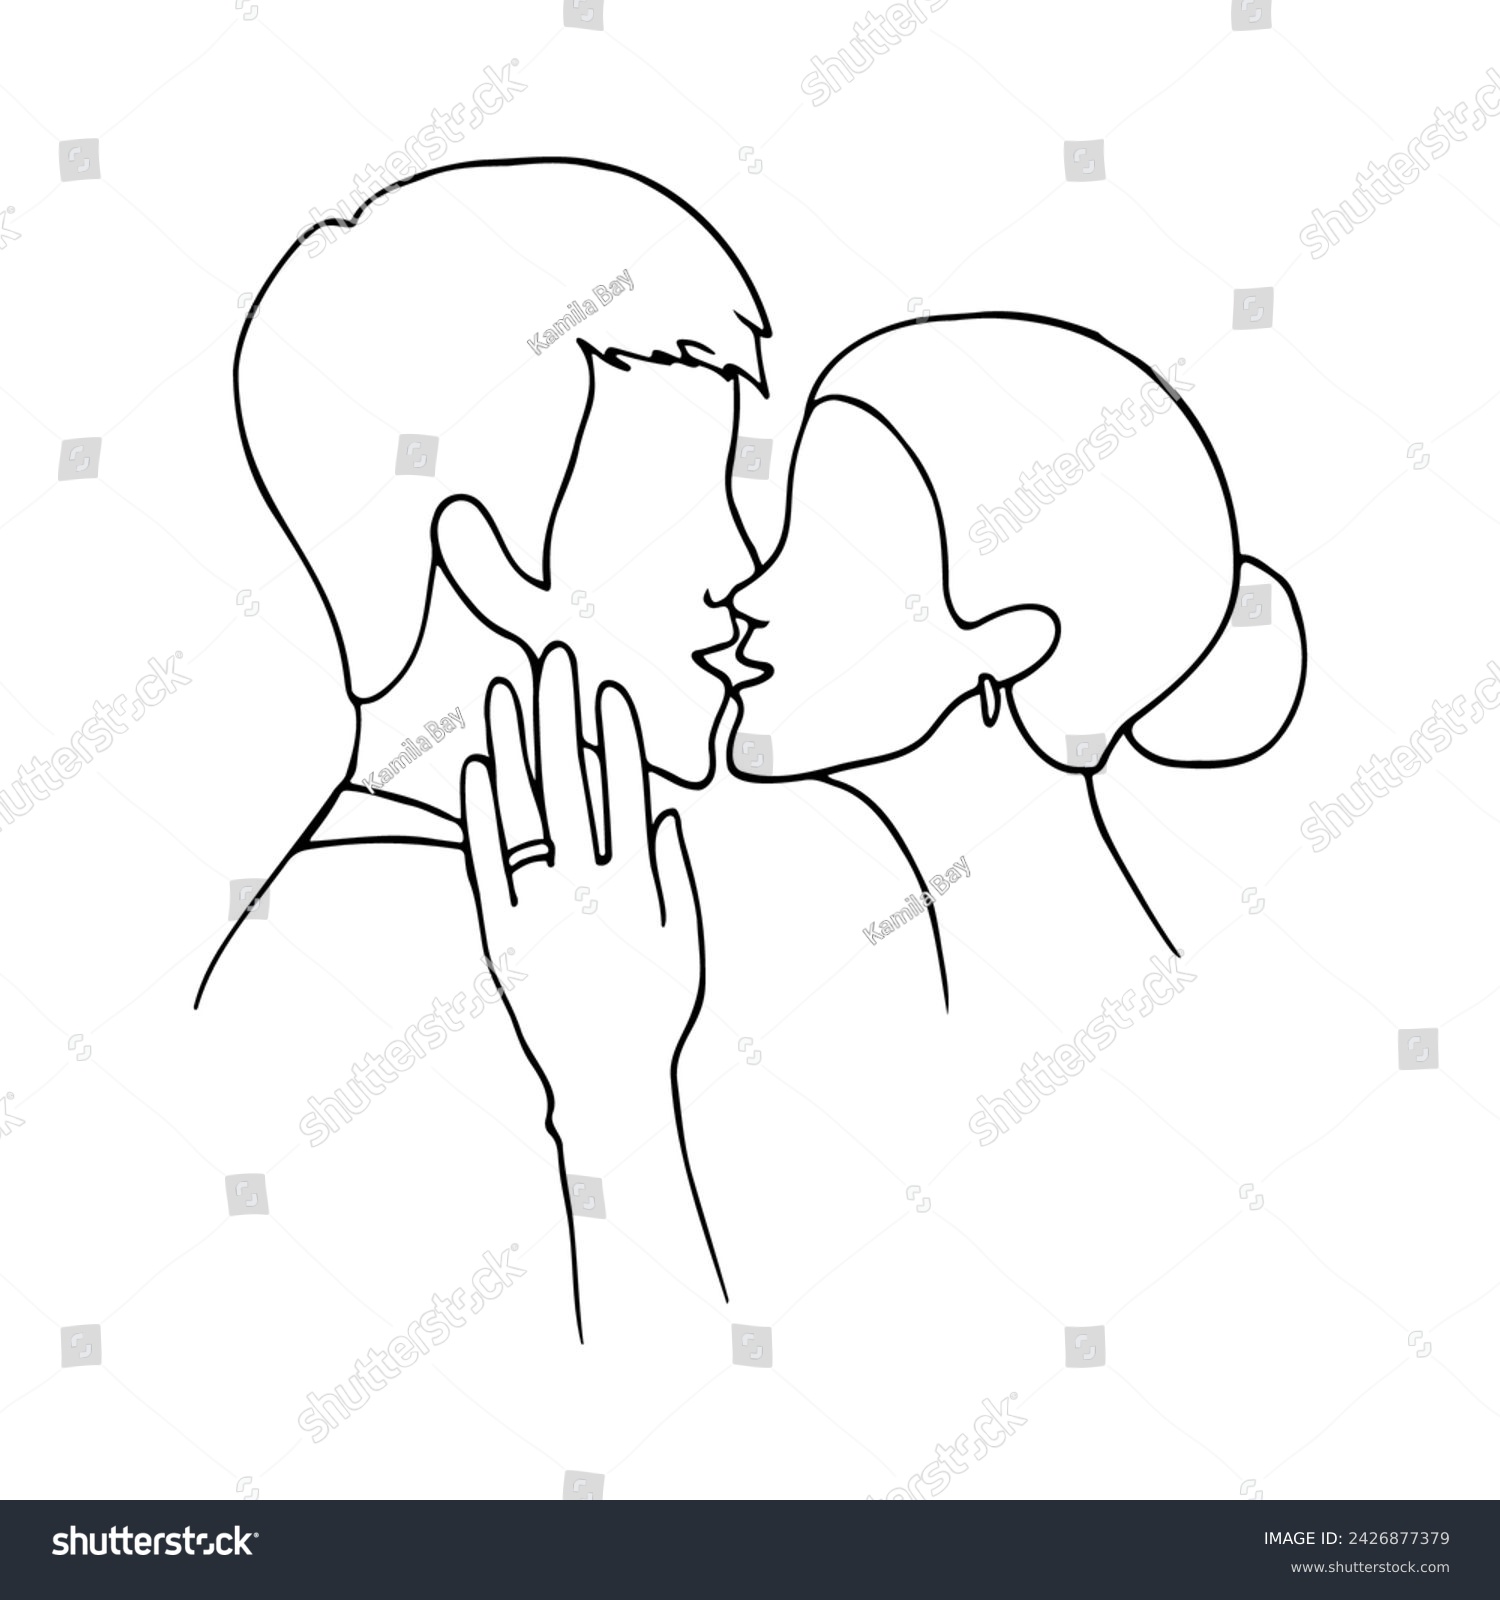 SVG of woman and man almost kiss, the woman's left hand with a ring on the ring finger touches the man's face. hand drawn illustration kiss of lovers with engagement svg